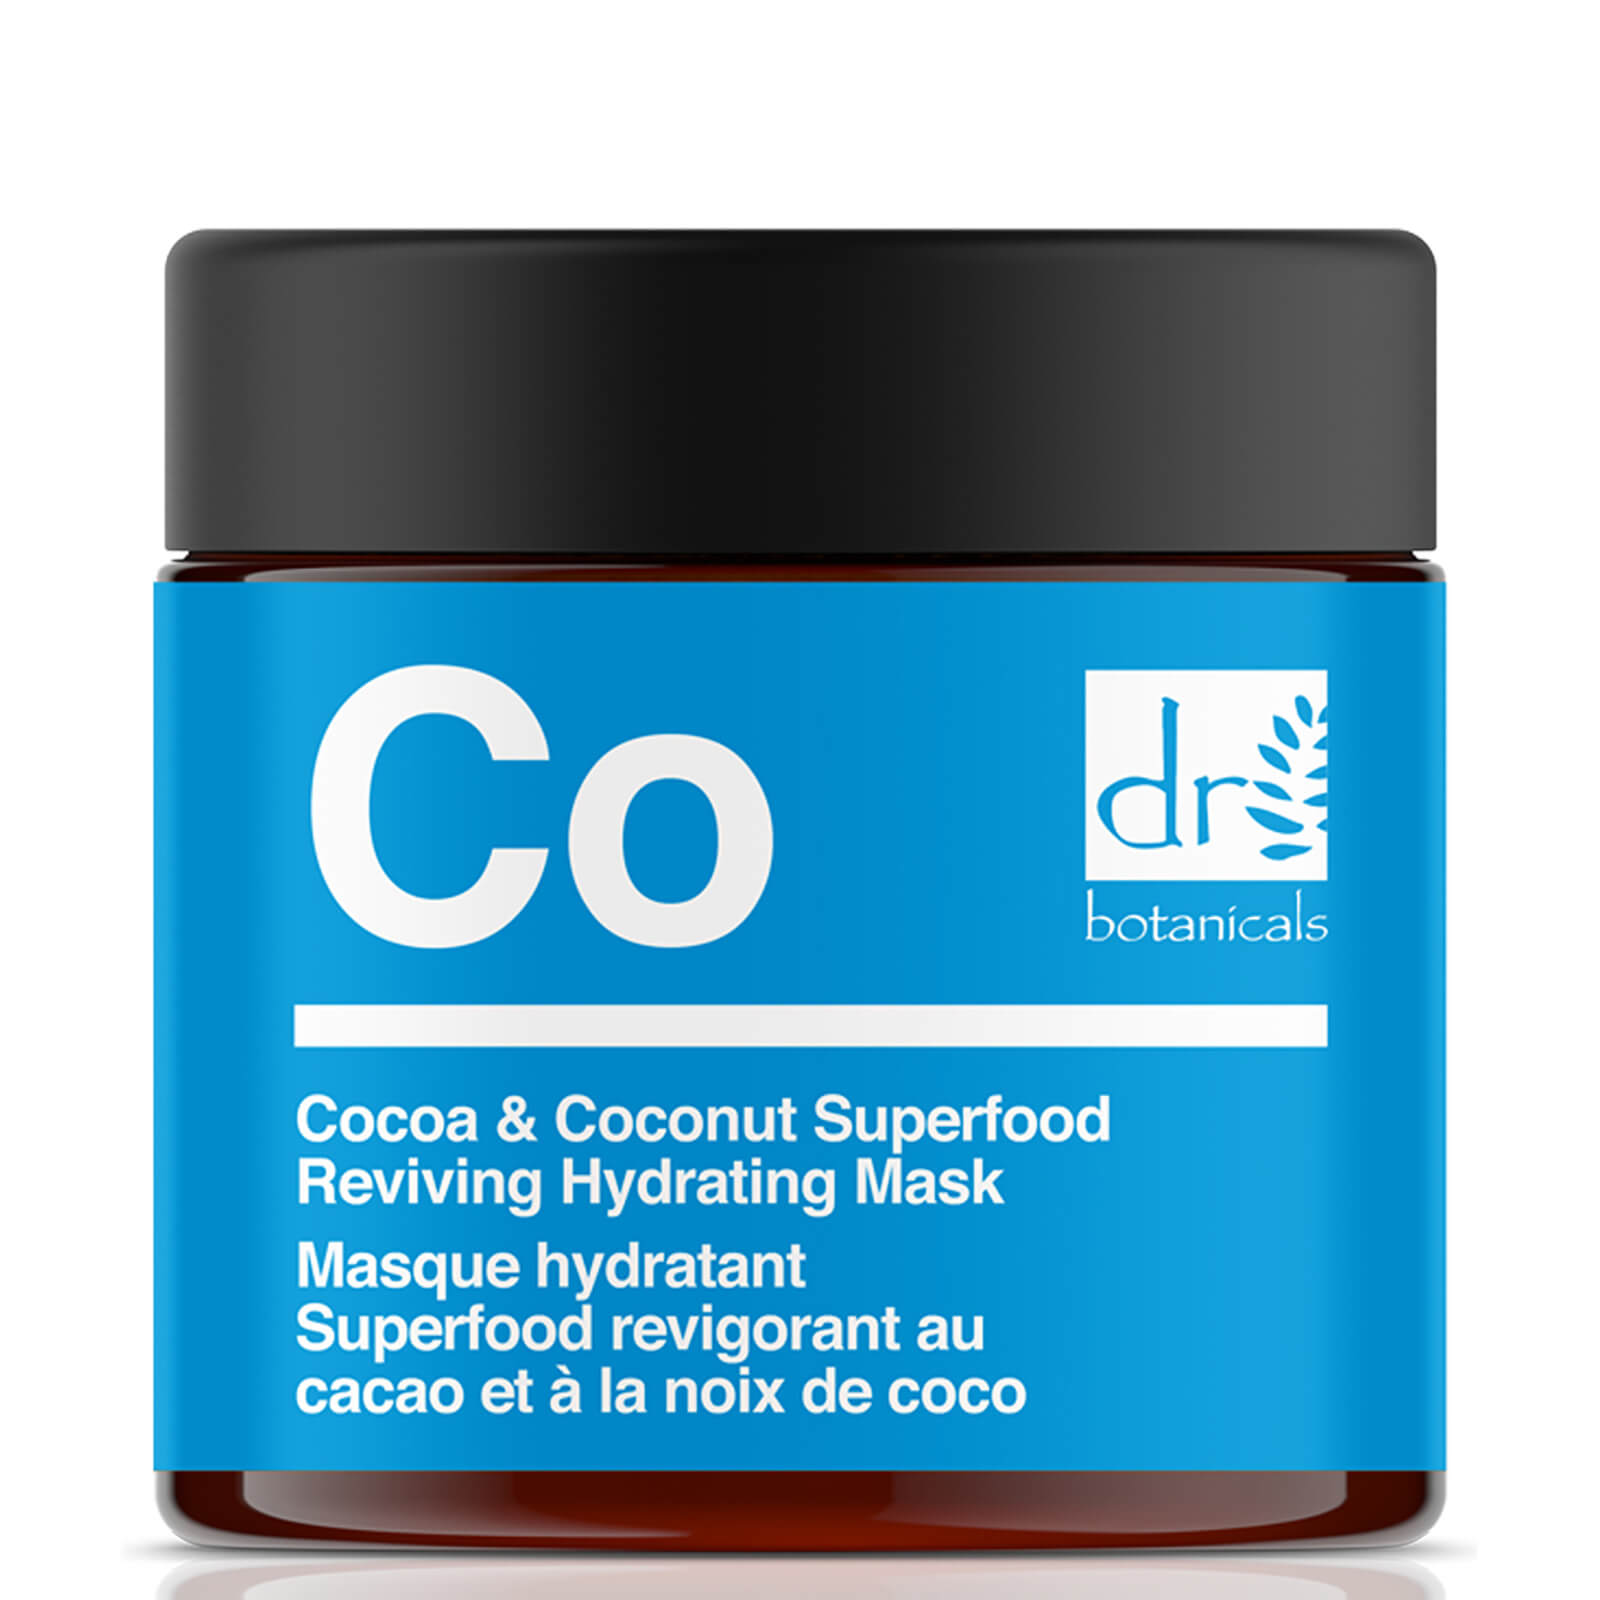 Dr Botanicals Apothecary Cocoa and Coconut Superfood Reviving Hydrating Mask 50ml